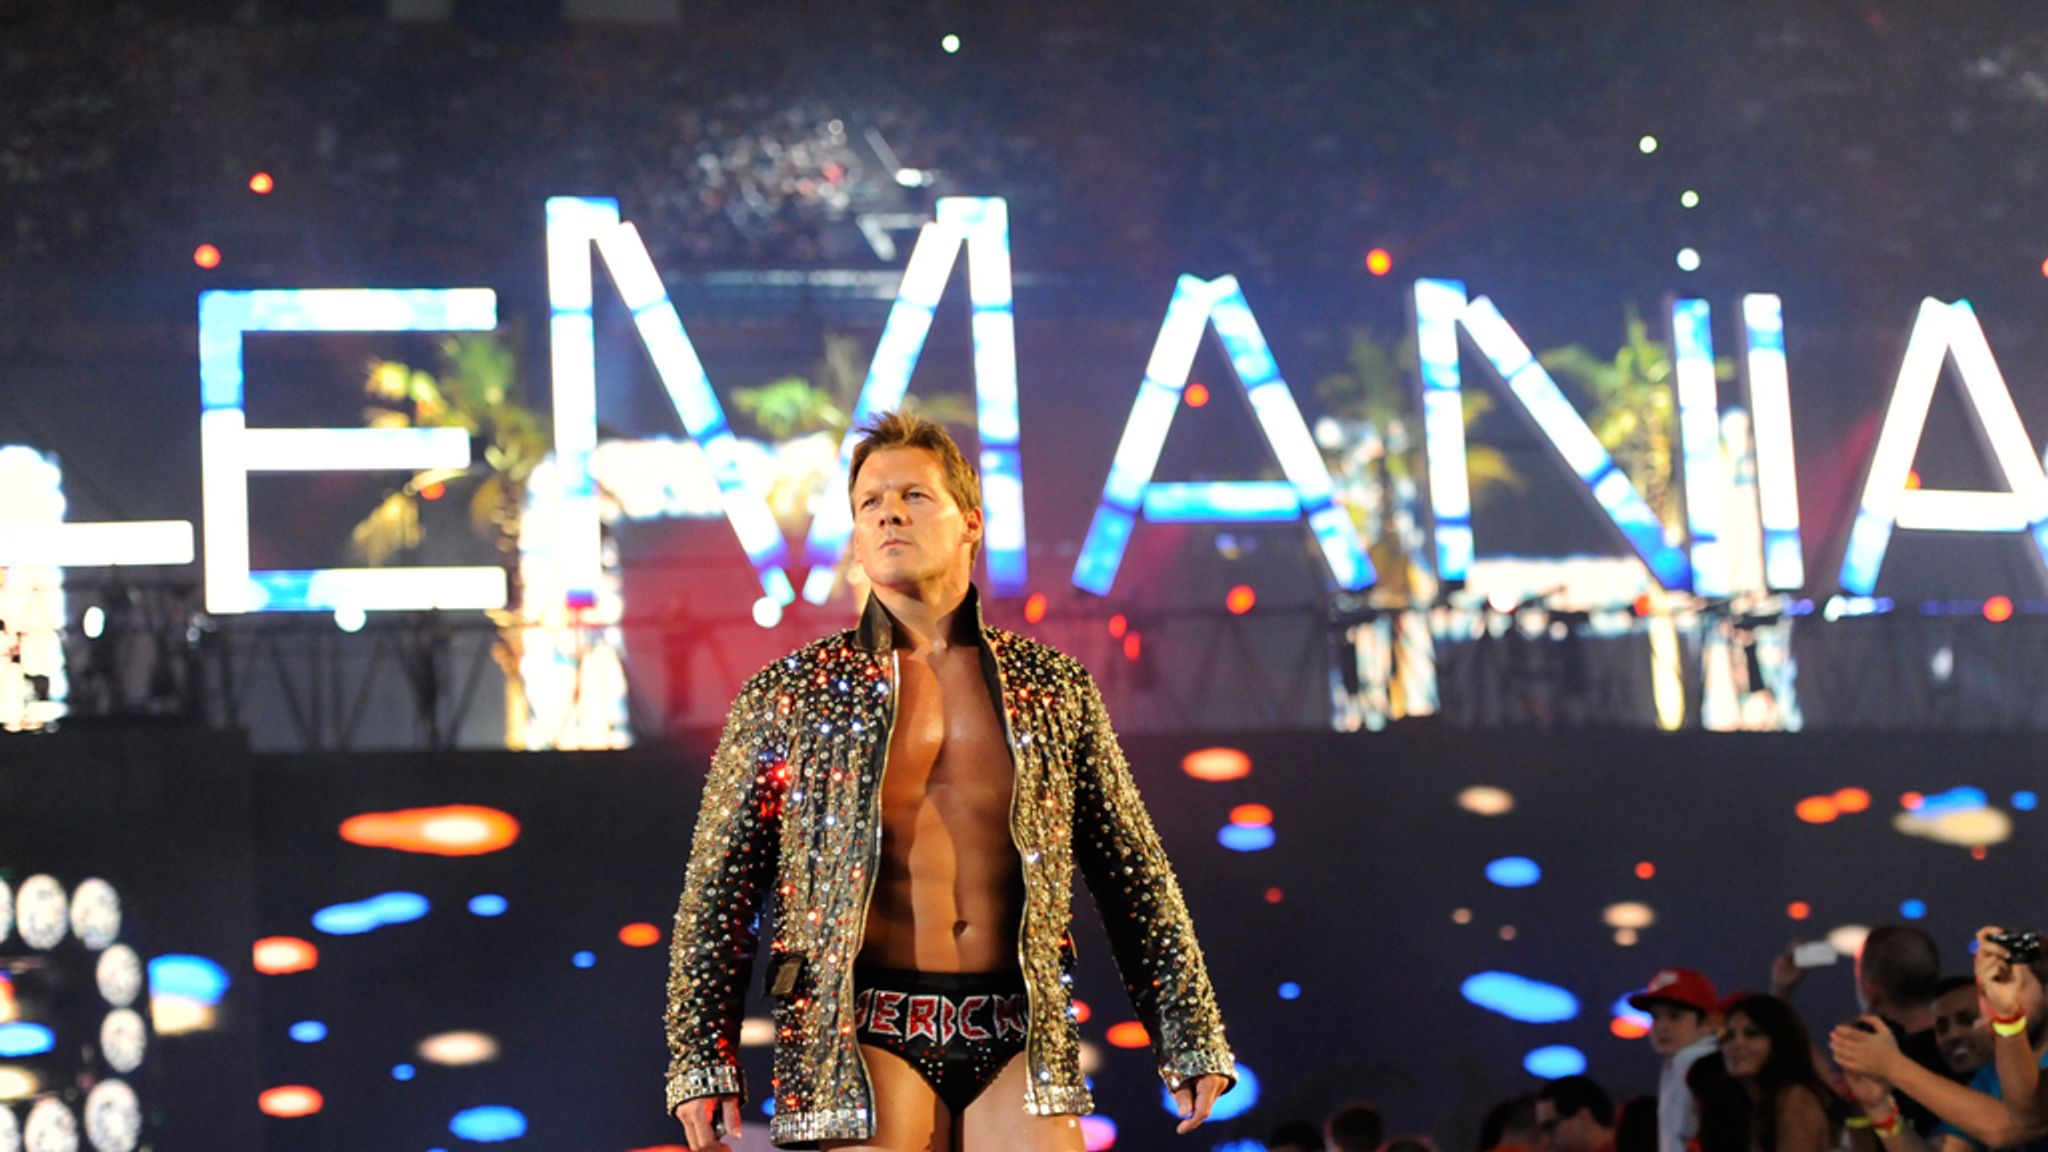 Chris Jericho Wallpapers (79+ images)